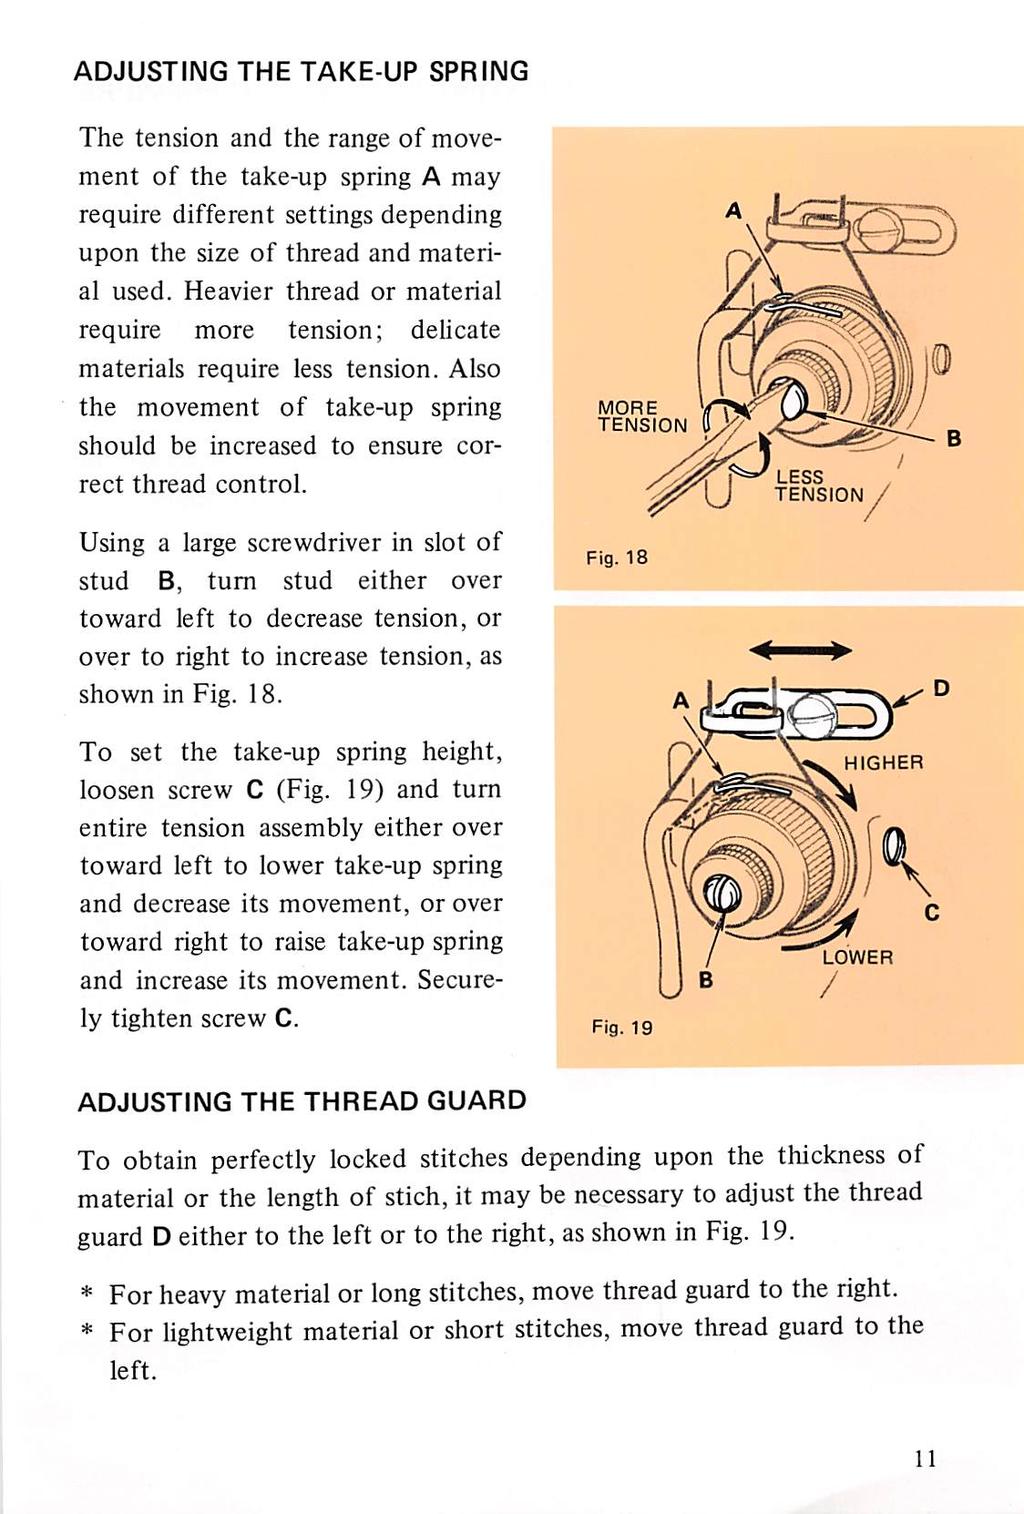 ADJUSTING THE TAKE-UP SPRING The tension and the range of move ment of the take-up spring A may require different settings depending upon the size of thread and materi al used.